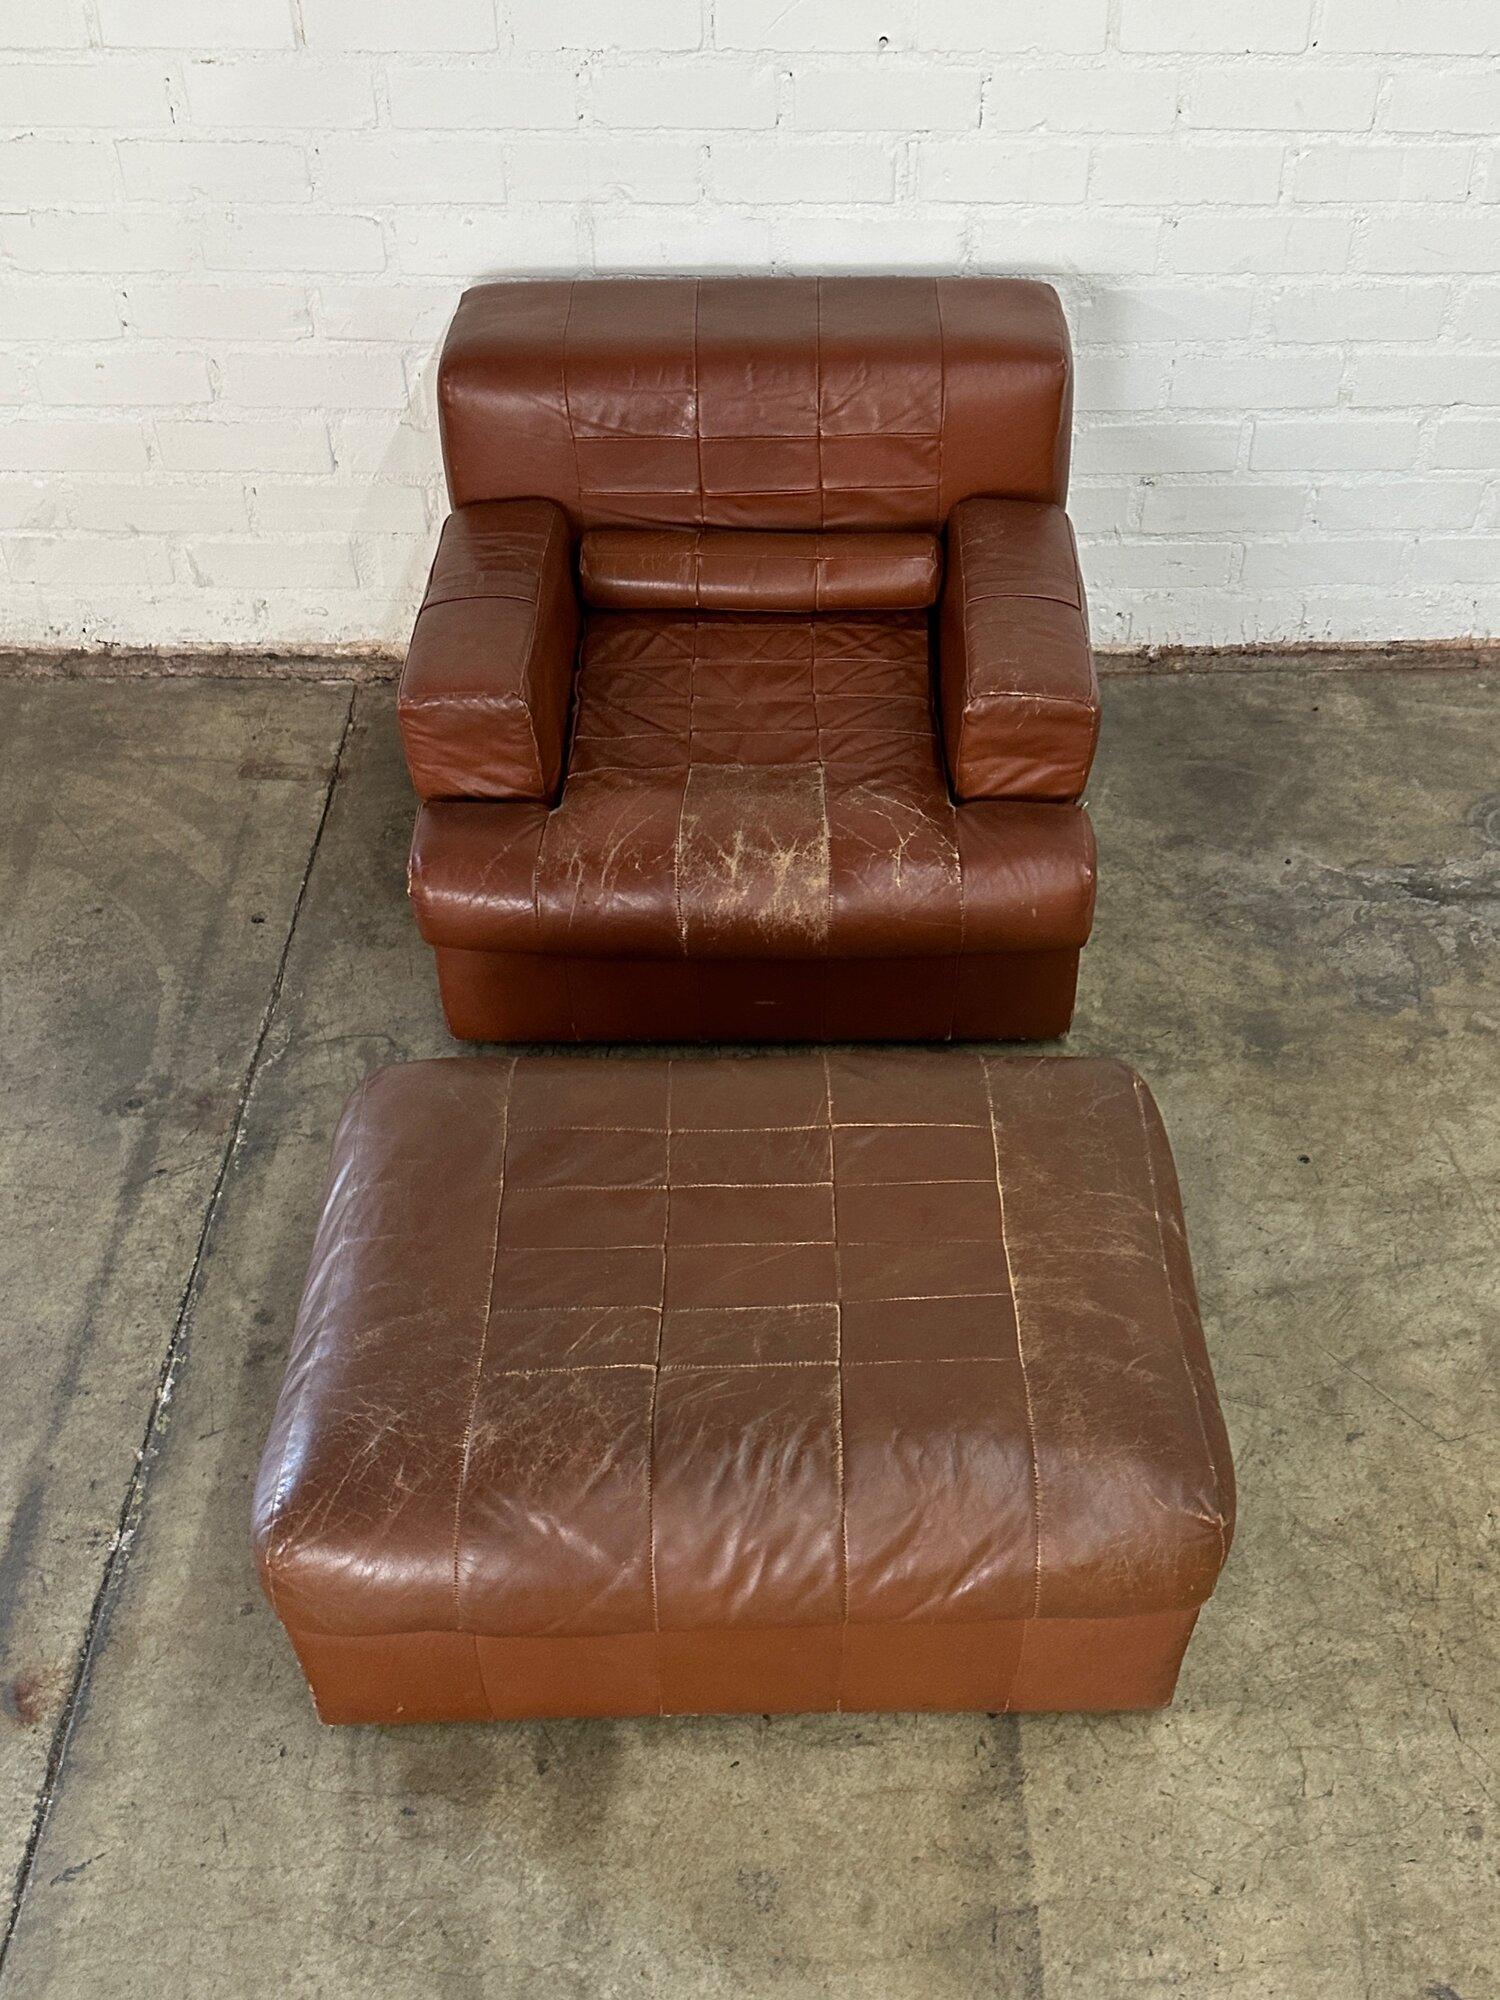 Ajustable Percival Lafer lounge chair and ottoman For Sale 3